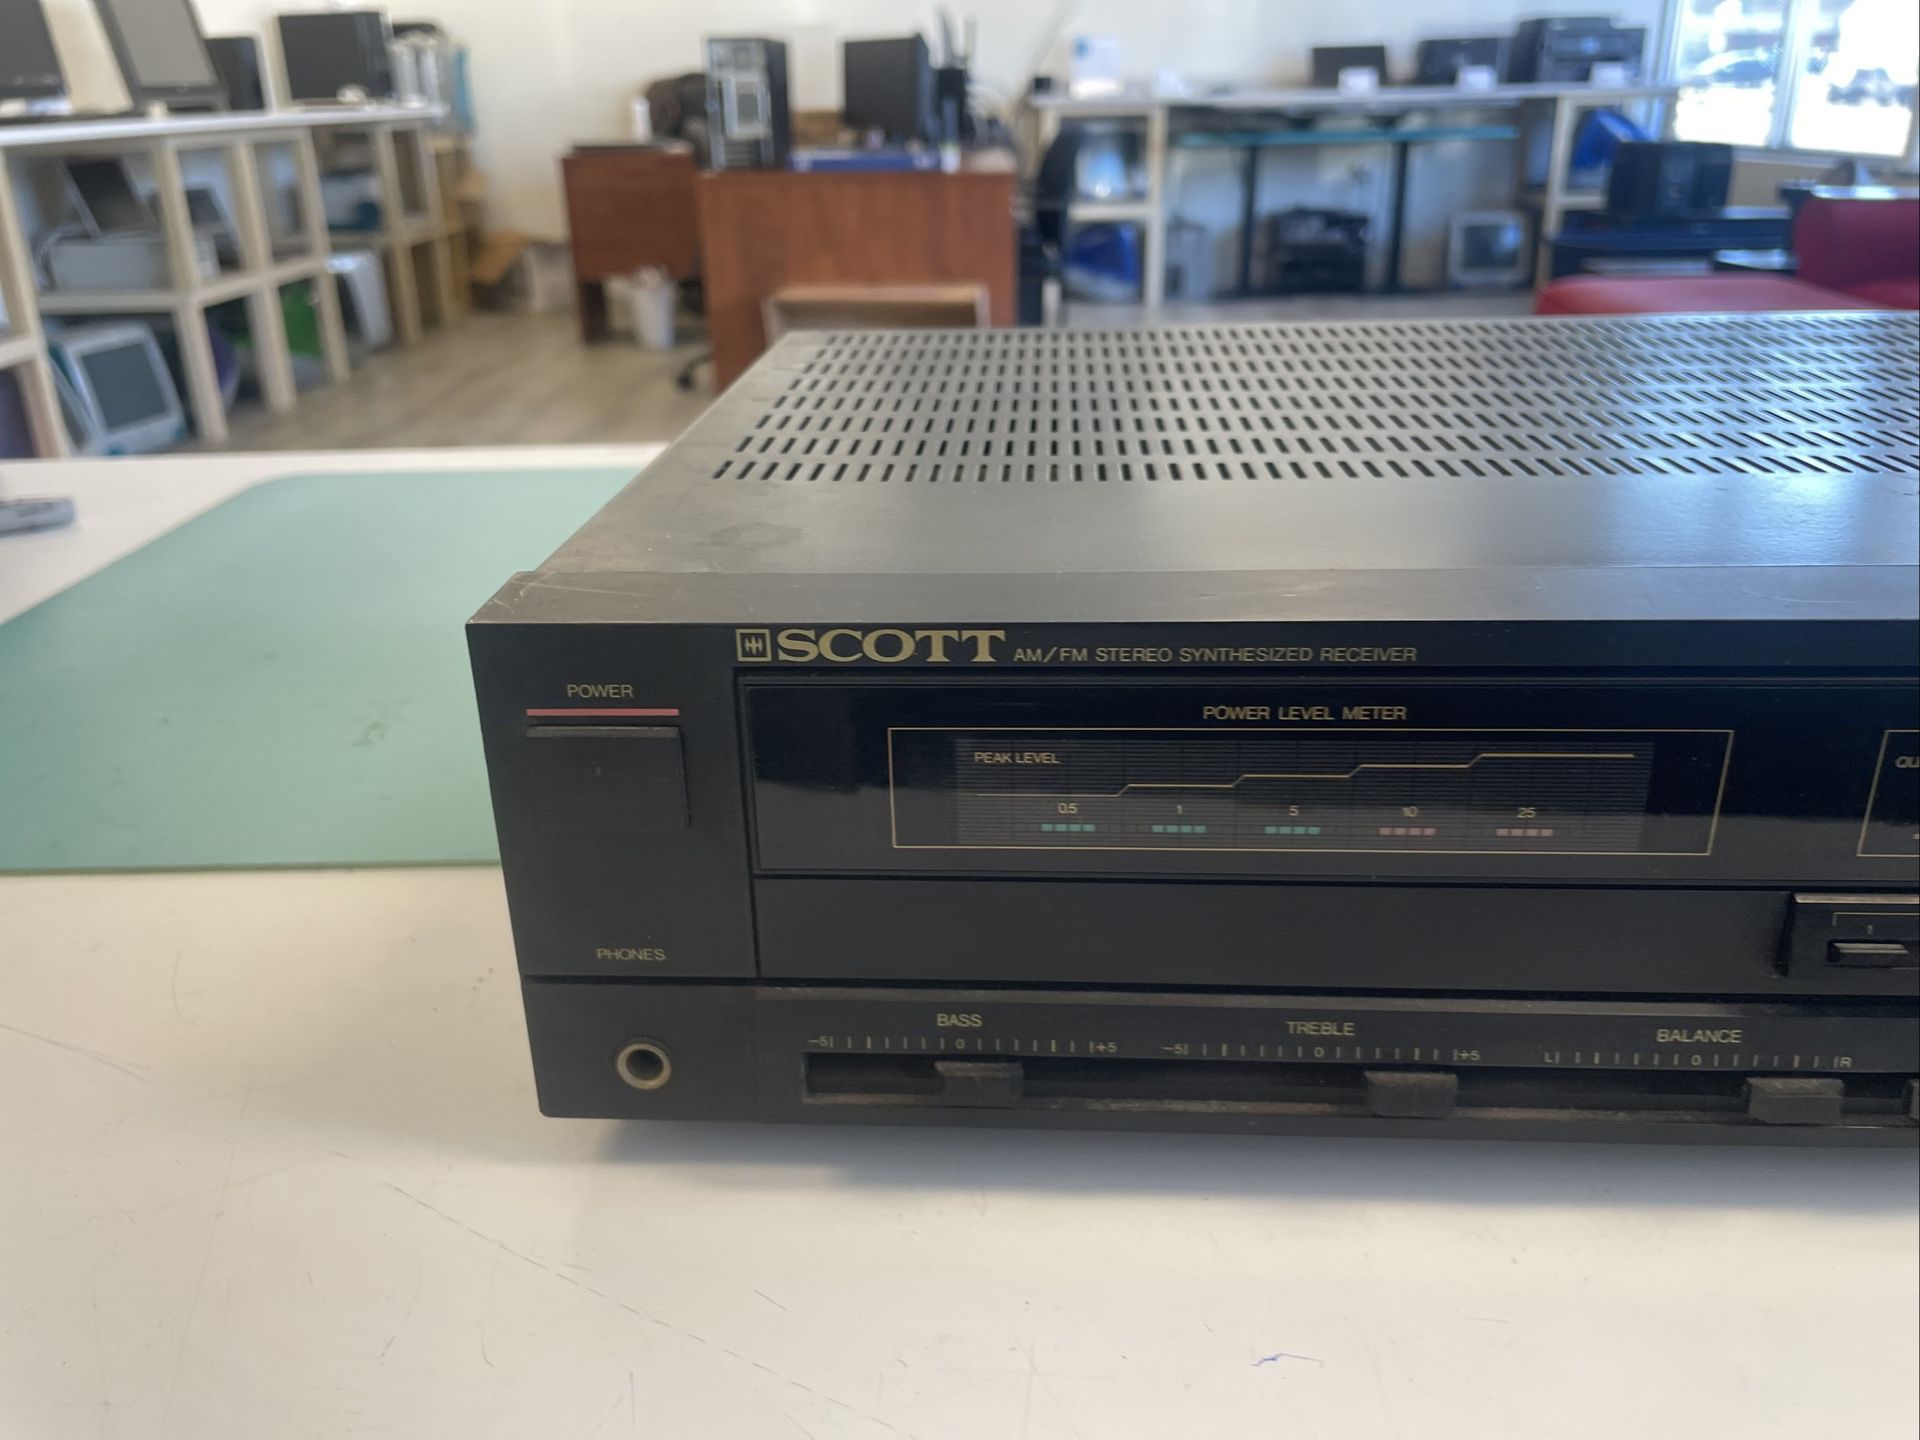 Scott AM/FM Stereo Synthesized Receiver